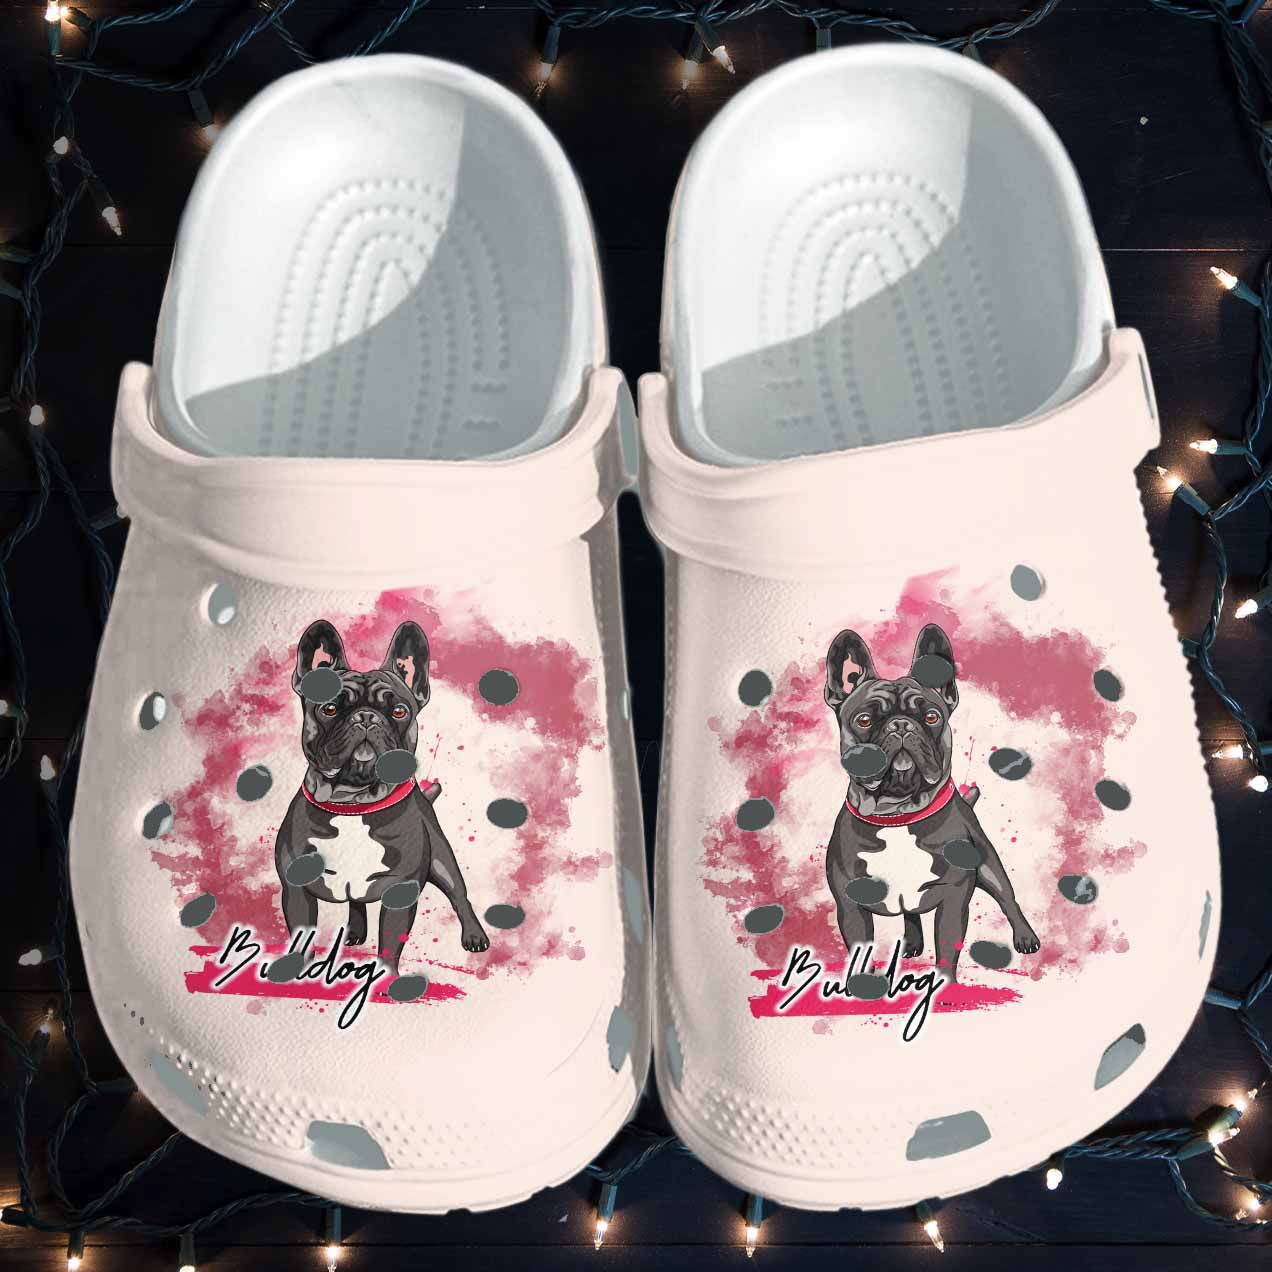 French Bulldog Funny Shoes Crocss Gifts Dogmom – Pit Bull Lover Croc Shoes Gifts Daughter Women For Men Women Kids